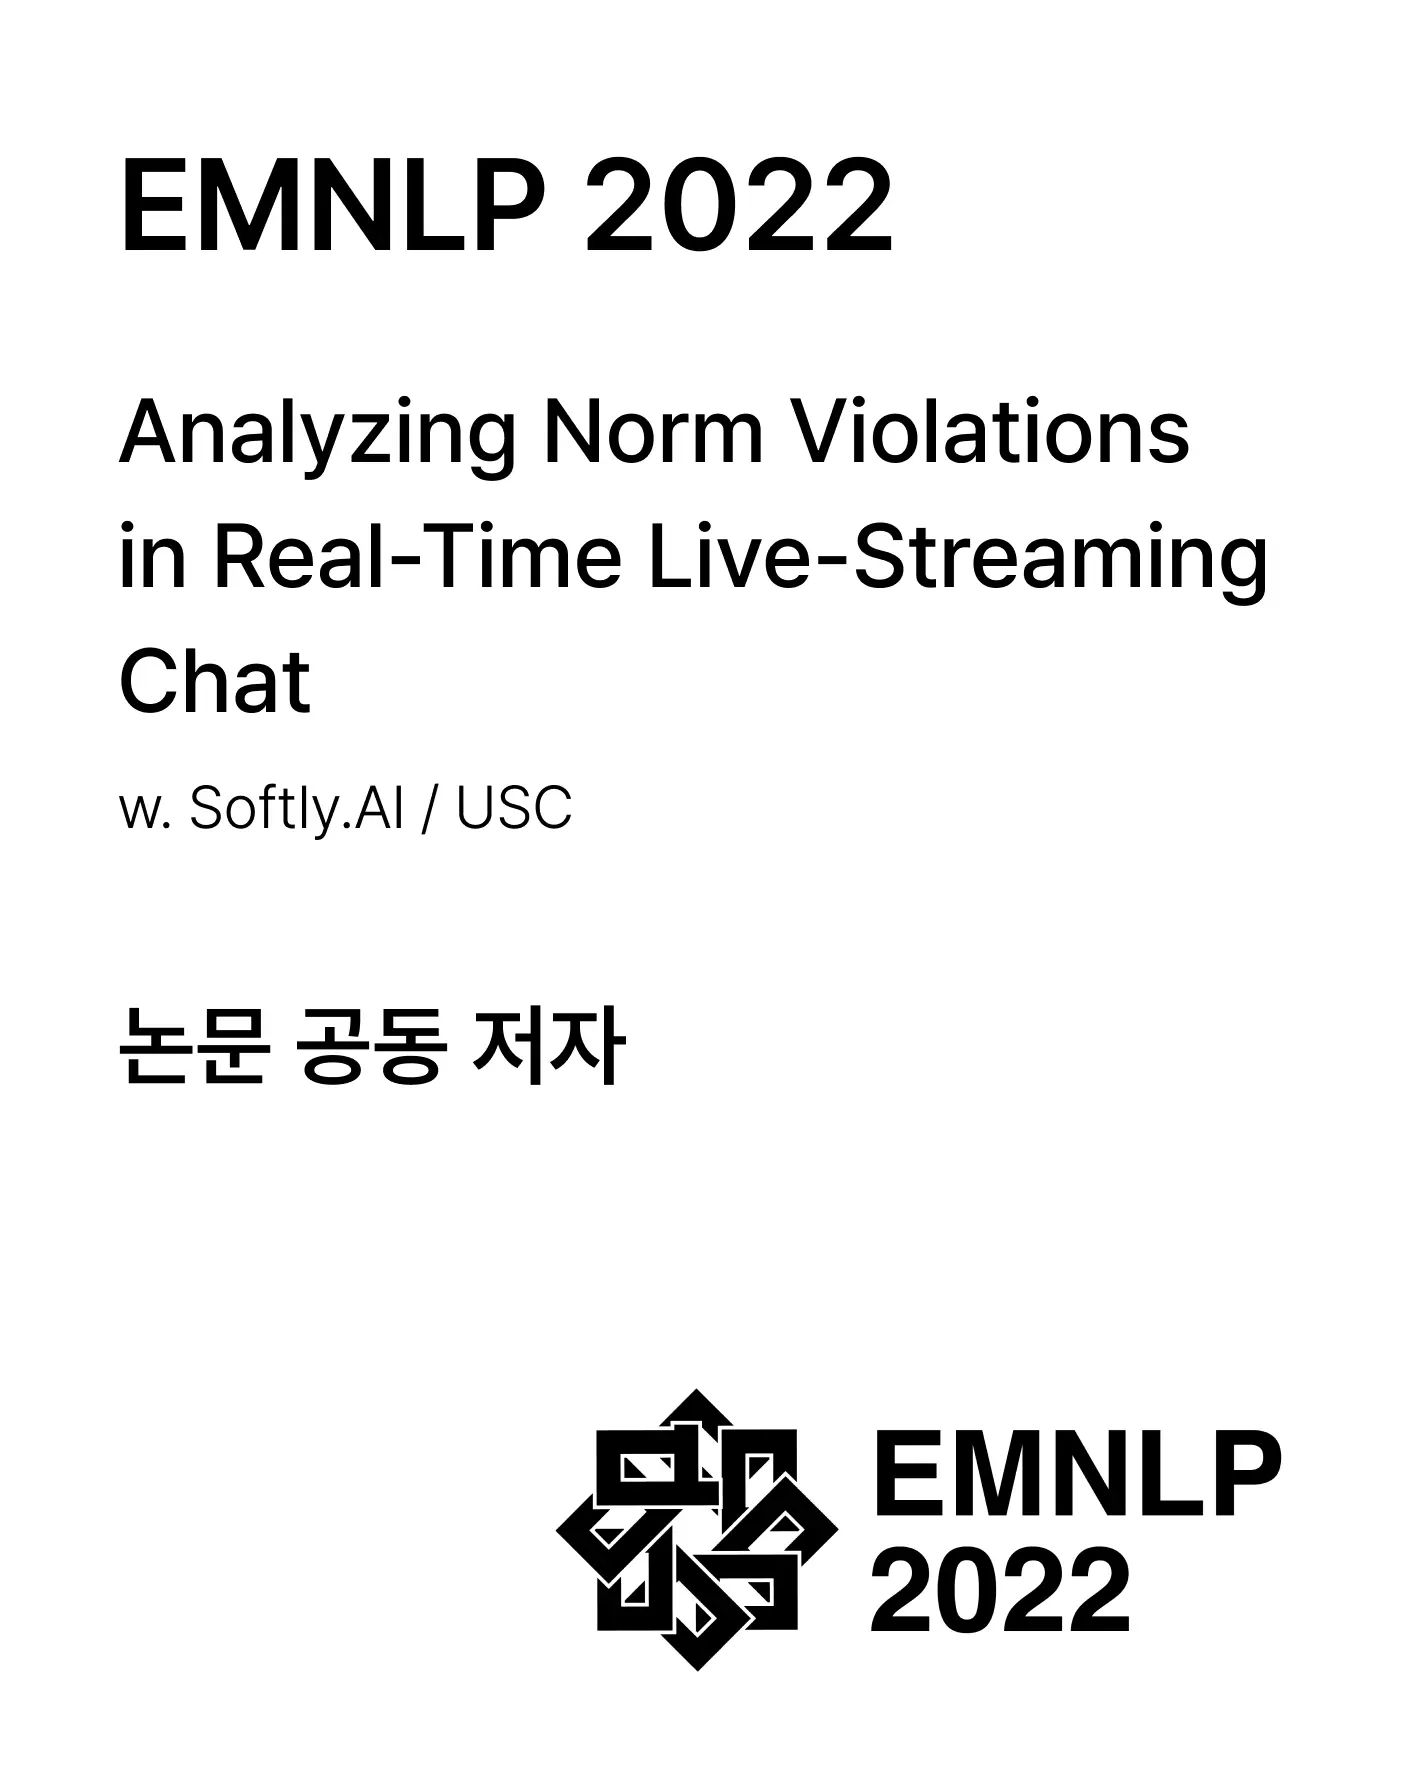 Analyzing Norm Violations in Real-Time Live-Streaming Chat